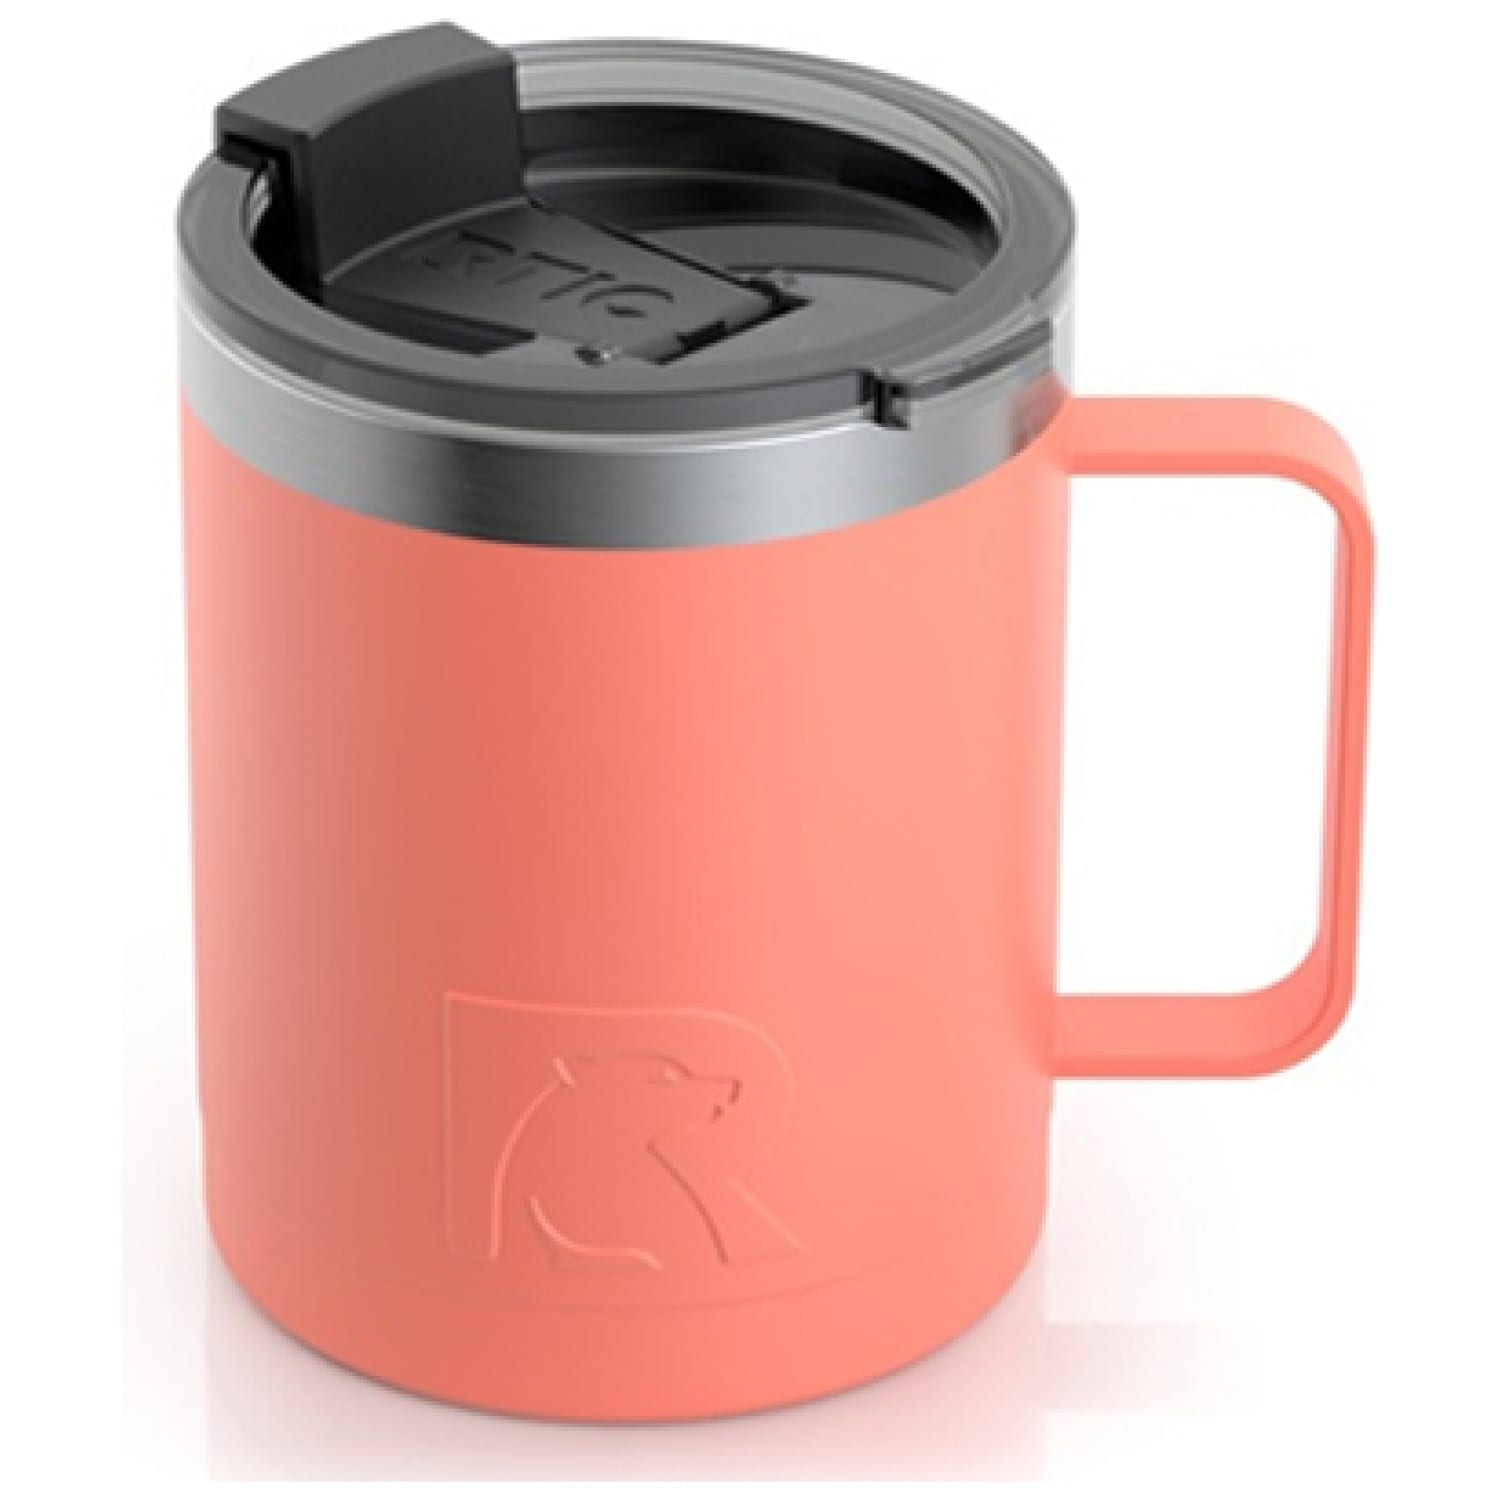 RTIC 12 oz. Stainless Steel Vacuum Insulated Coffee Cup - Matte